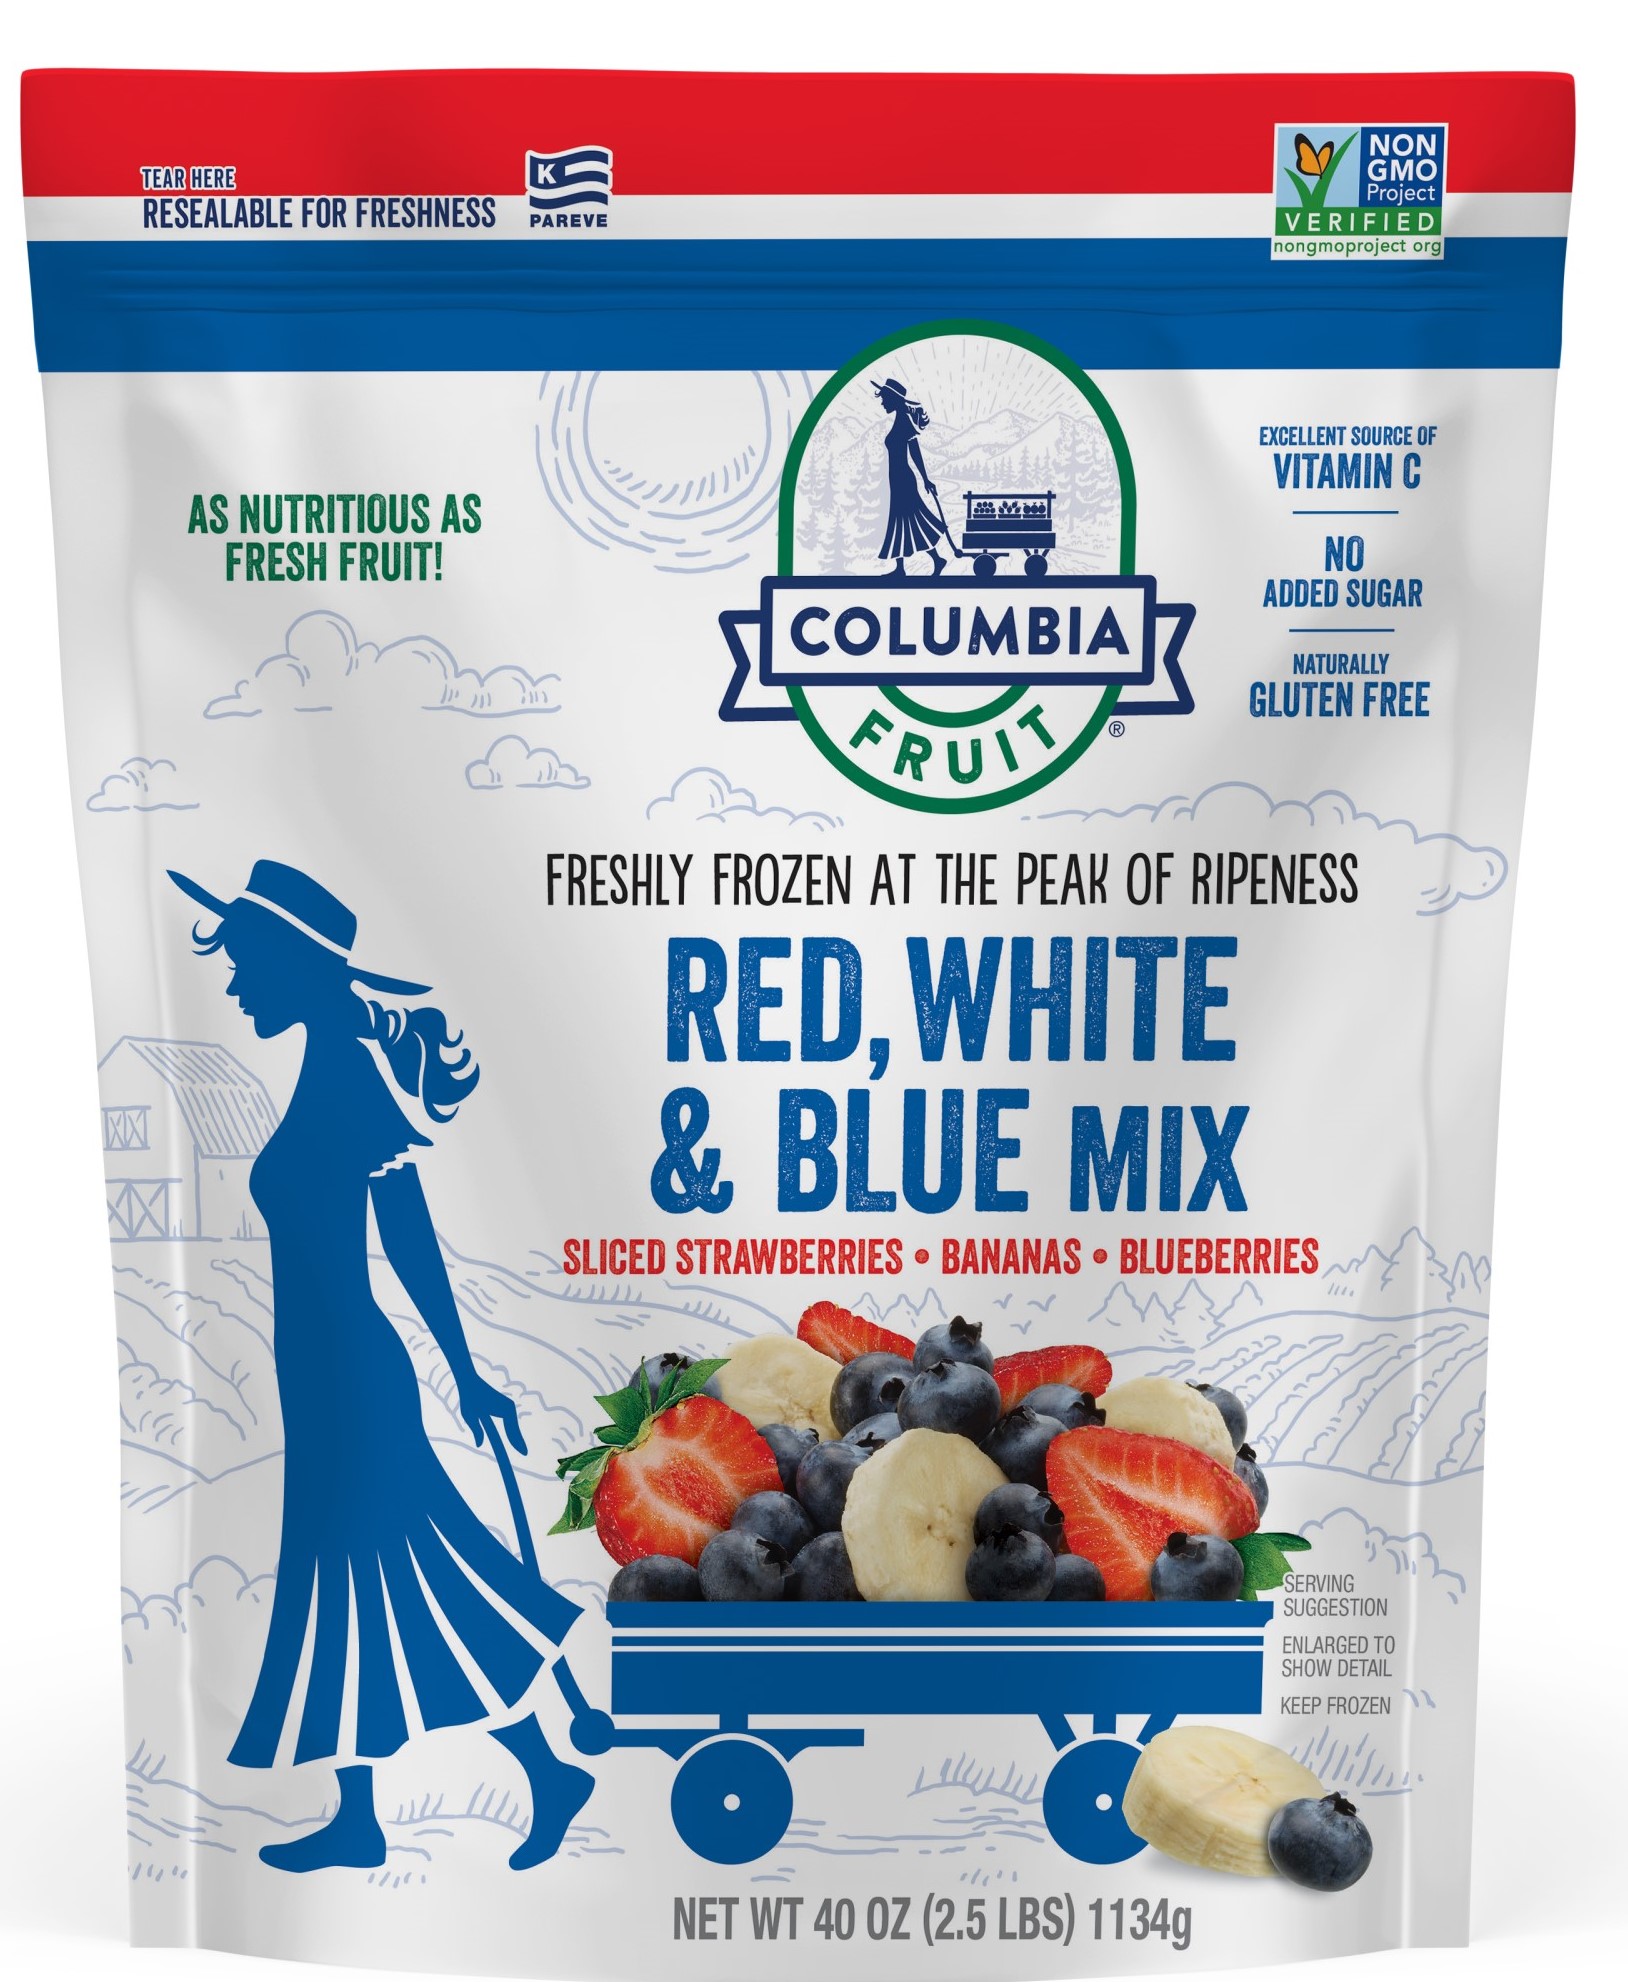 Our berries – Blue Royal